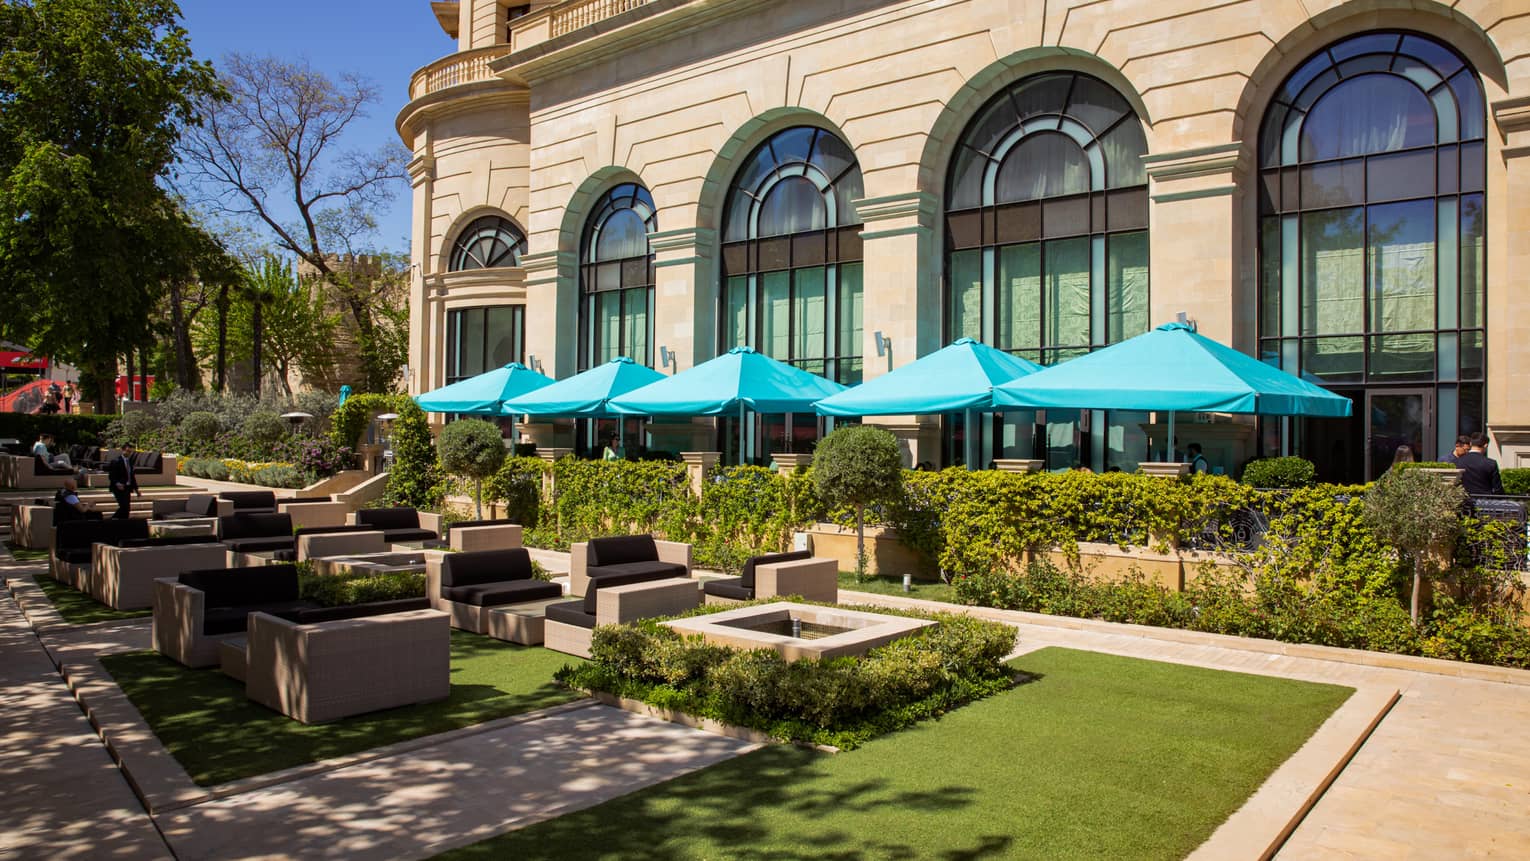 Eyvan Terrace dining area with shaded lounge and tables with aqua-blue umbrellas